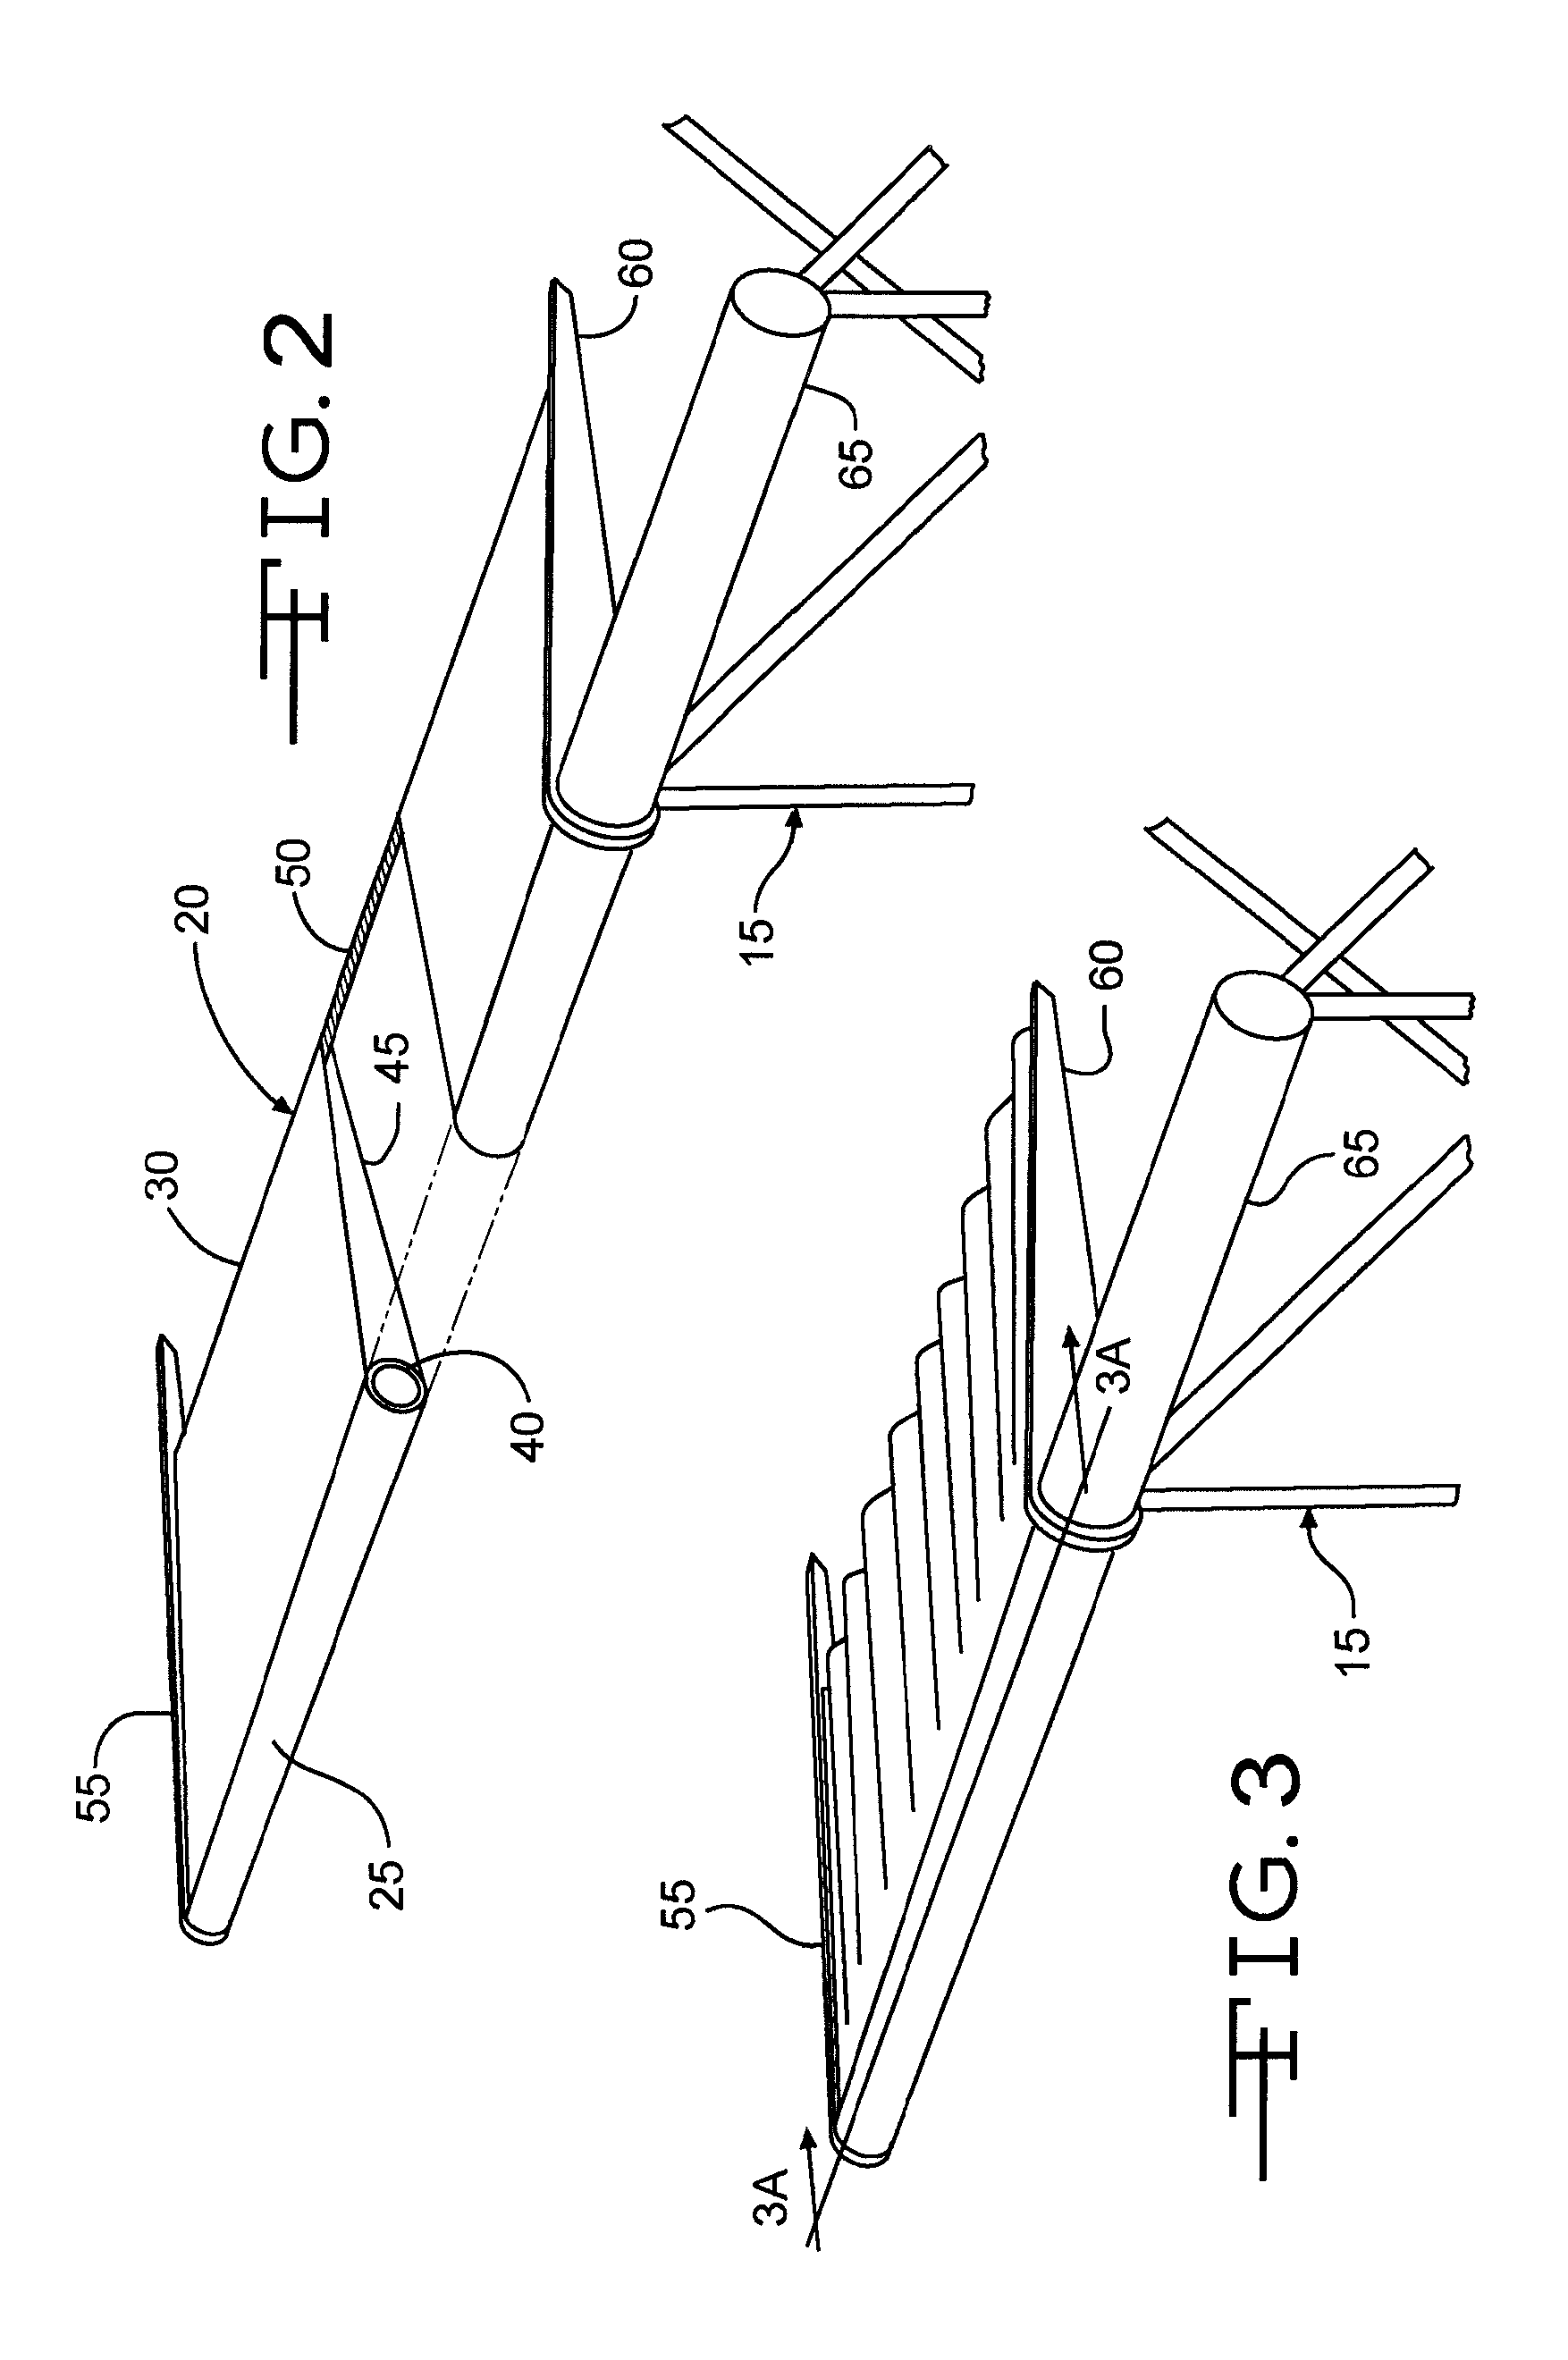 Rotating air cargo delivery system and method of construction